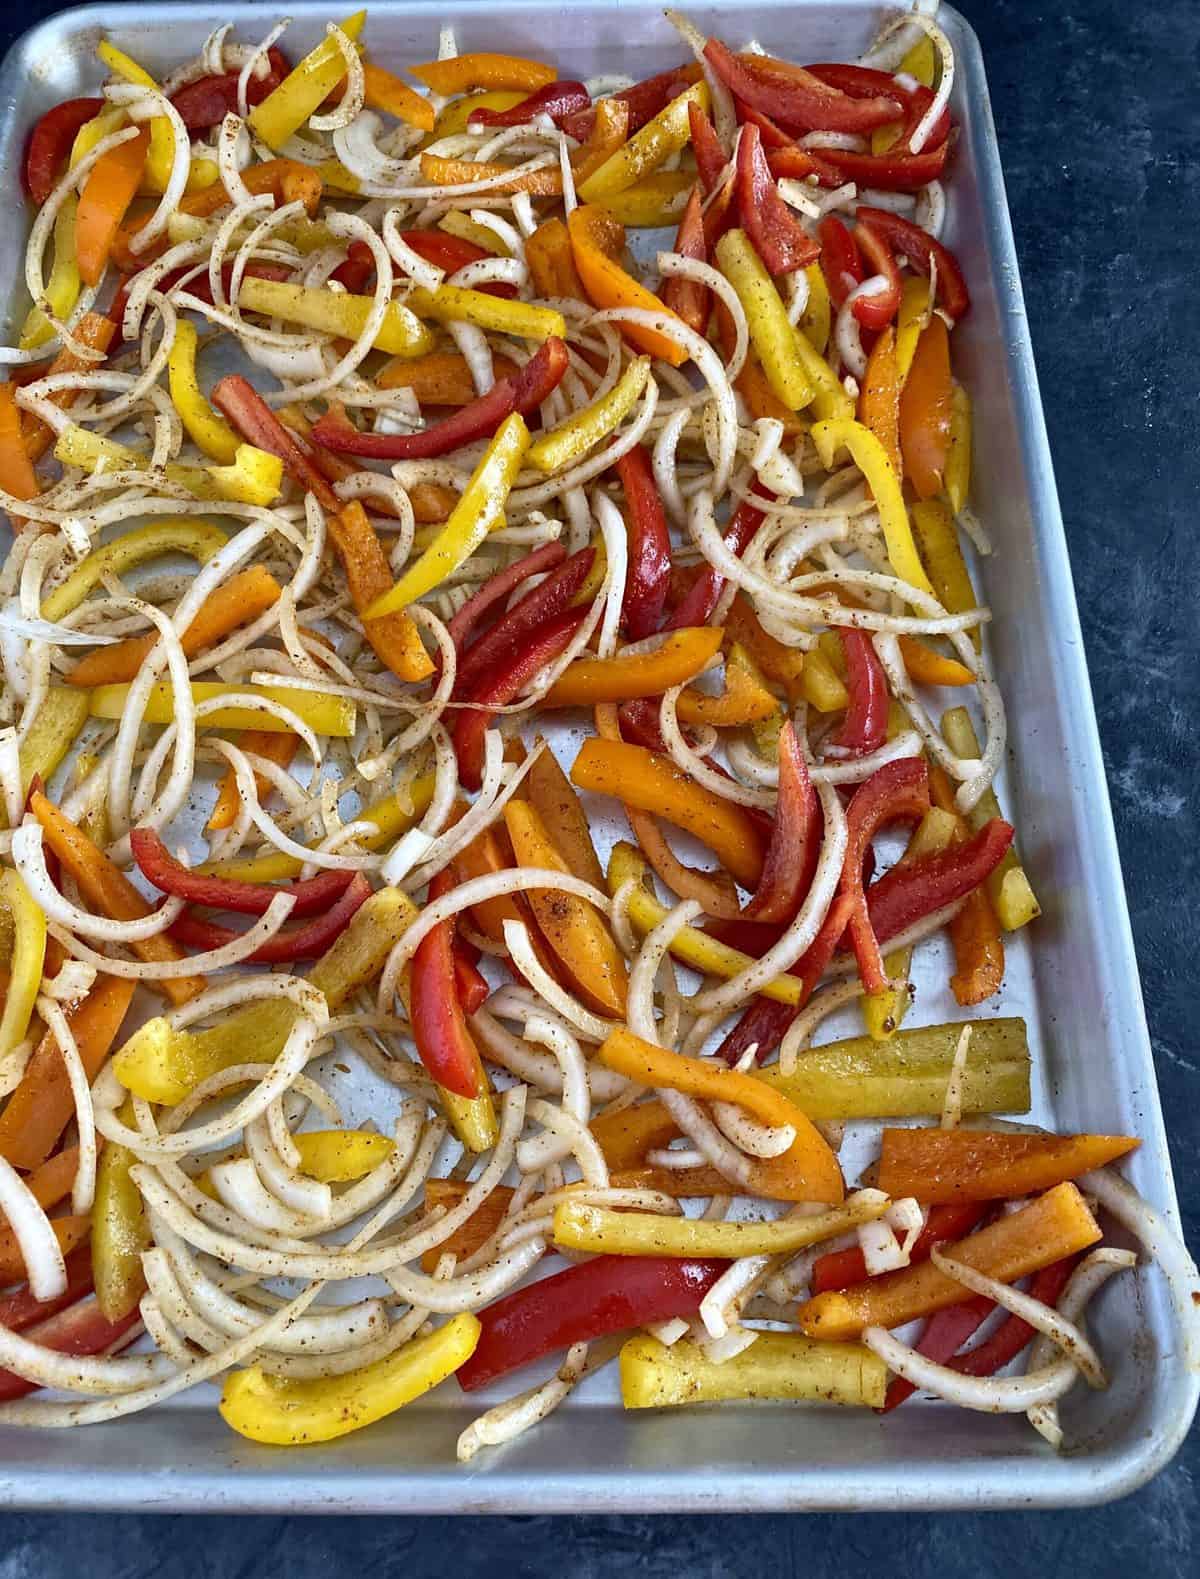 Chopped onions and colorful peppers on a sheet pan.